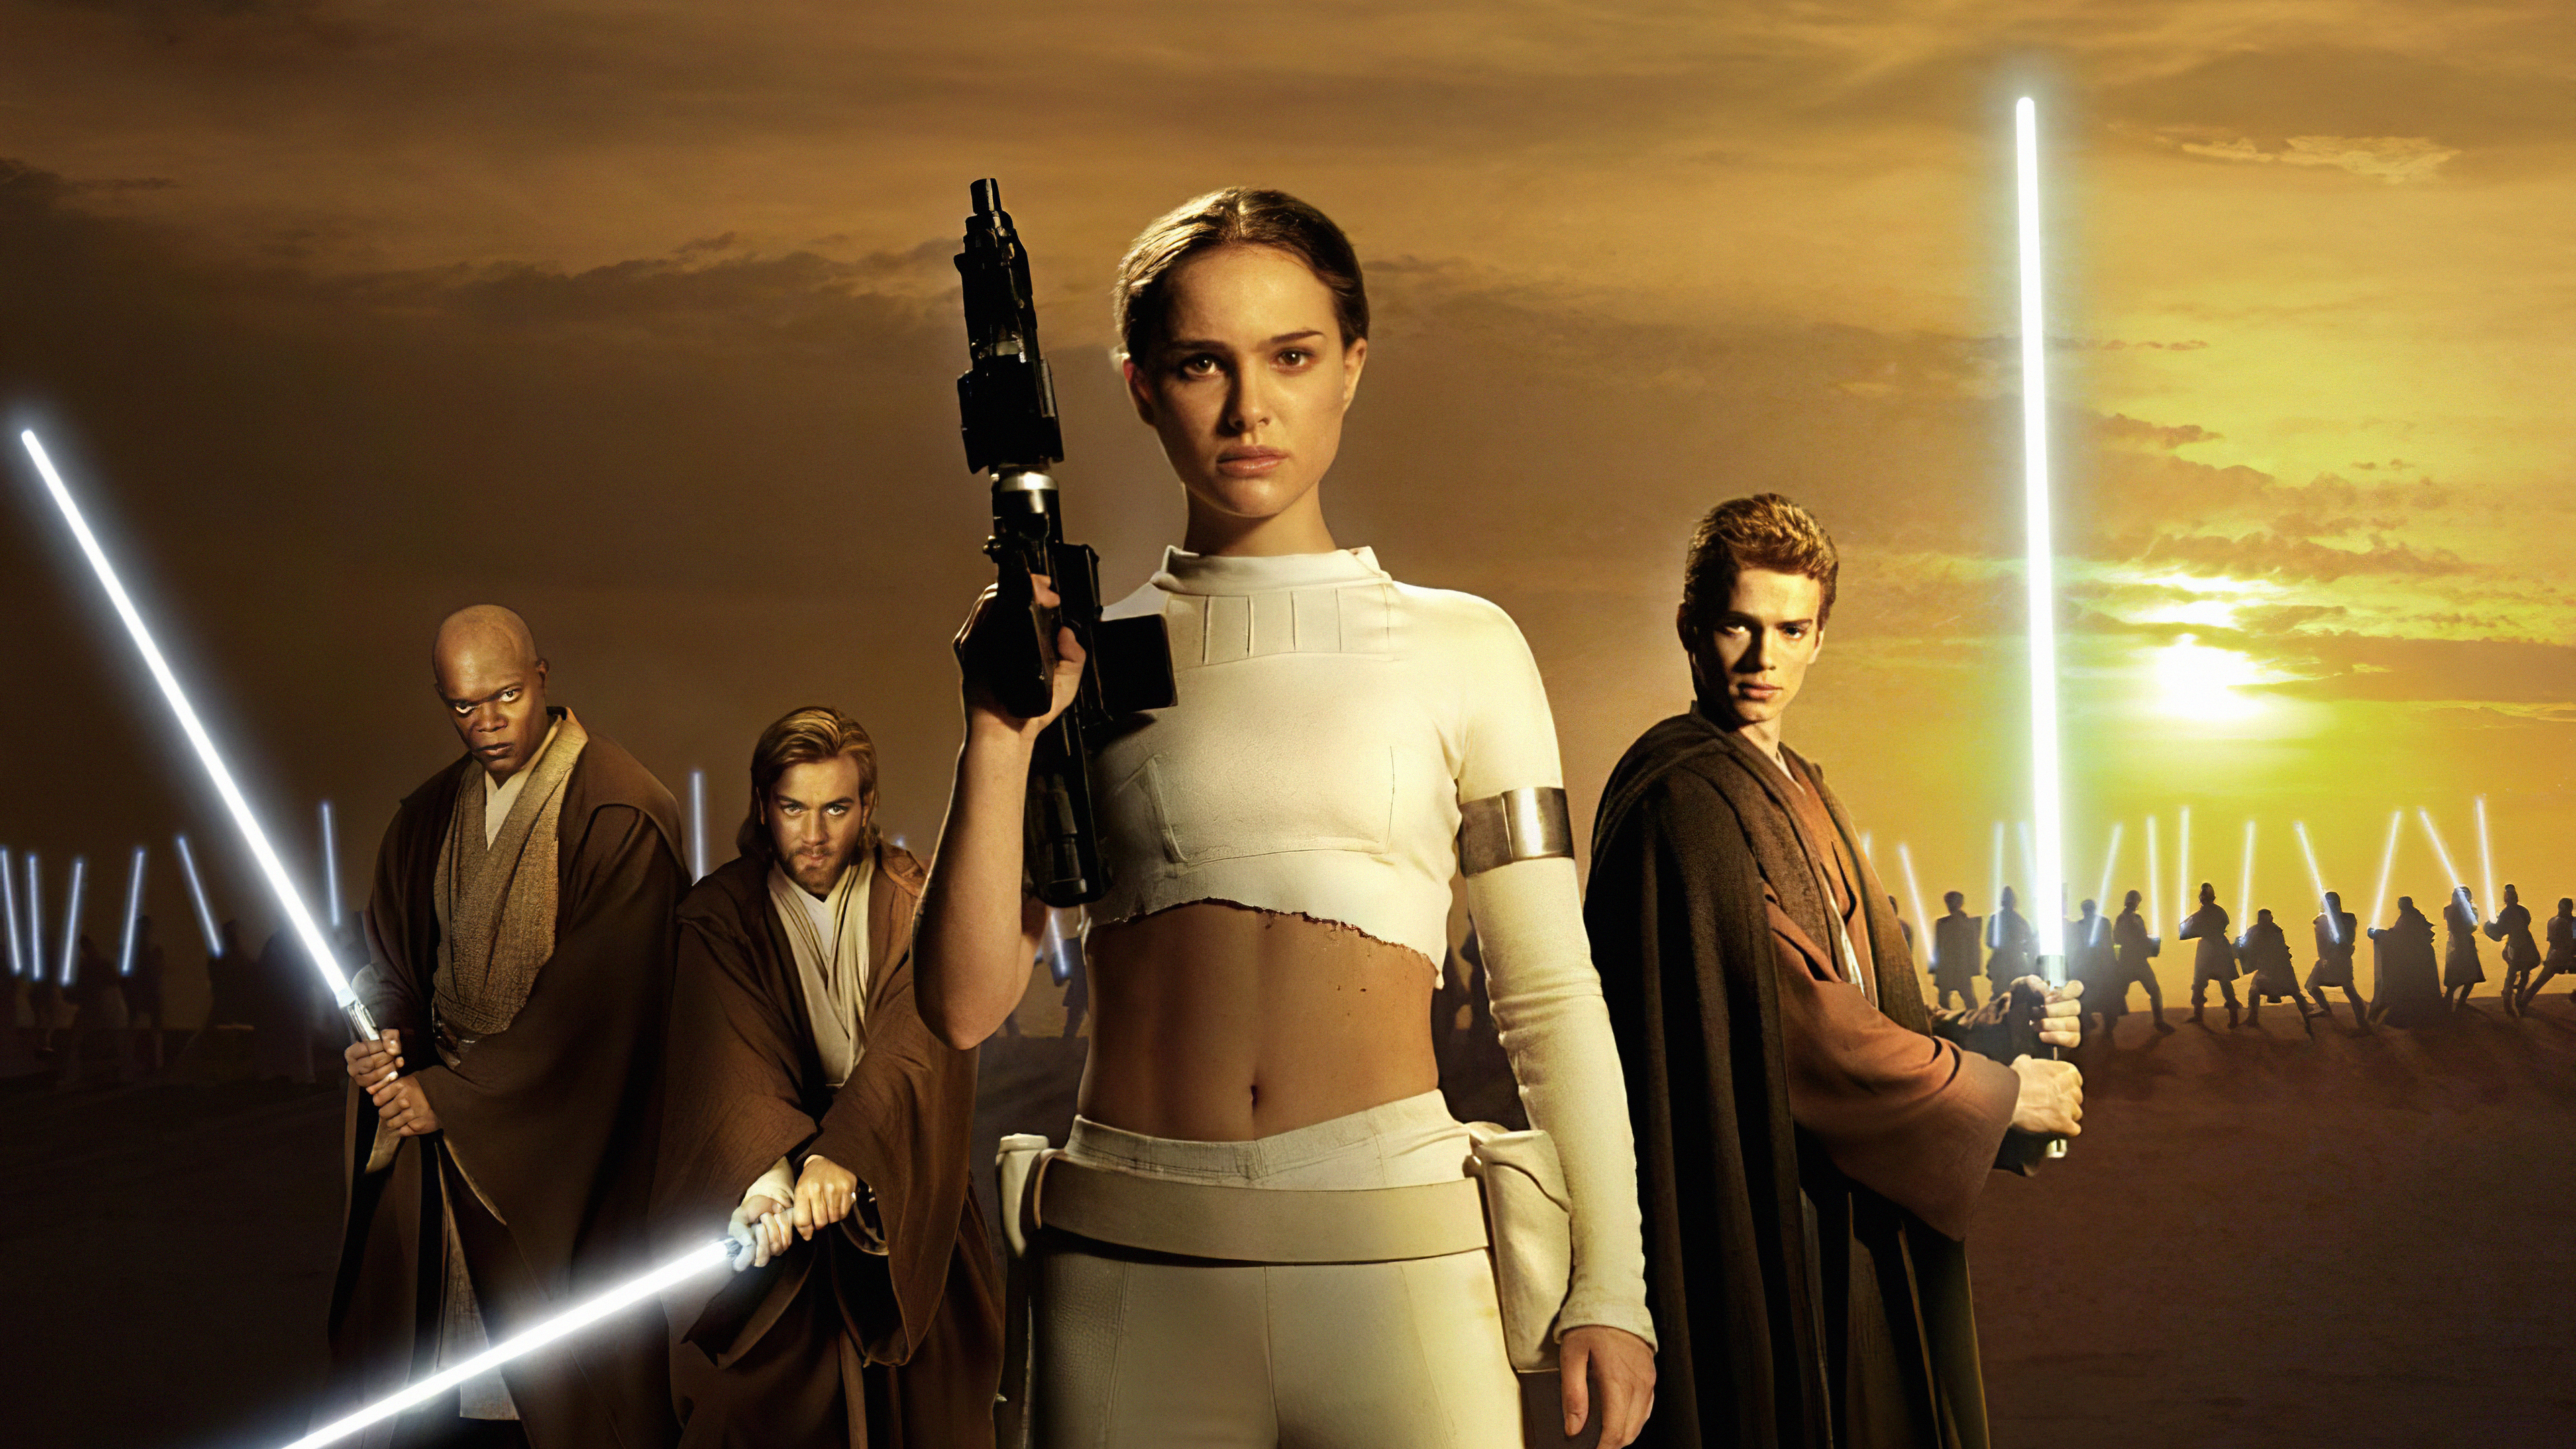 Attack Of The Clones Wallpapers